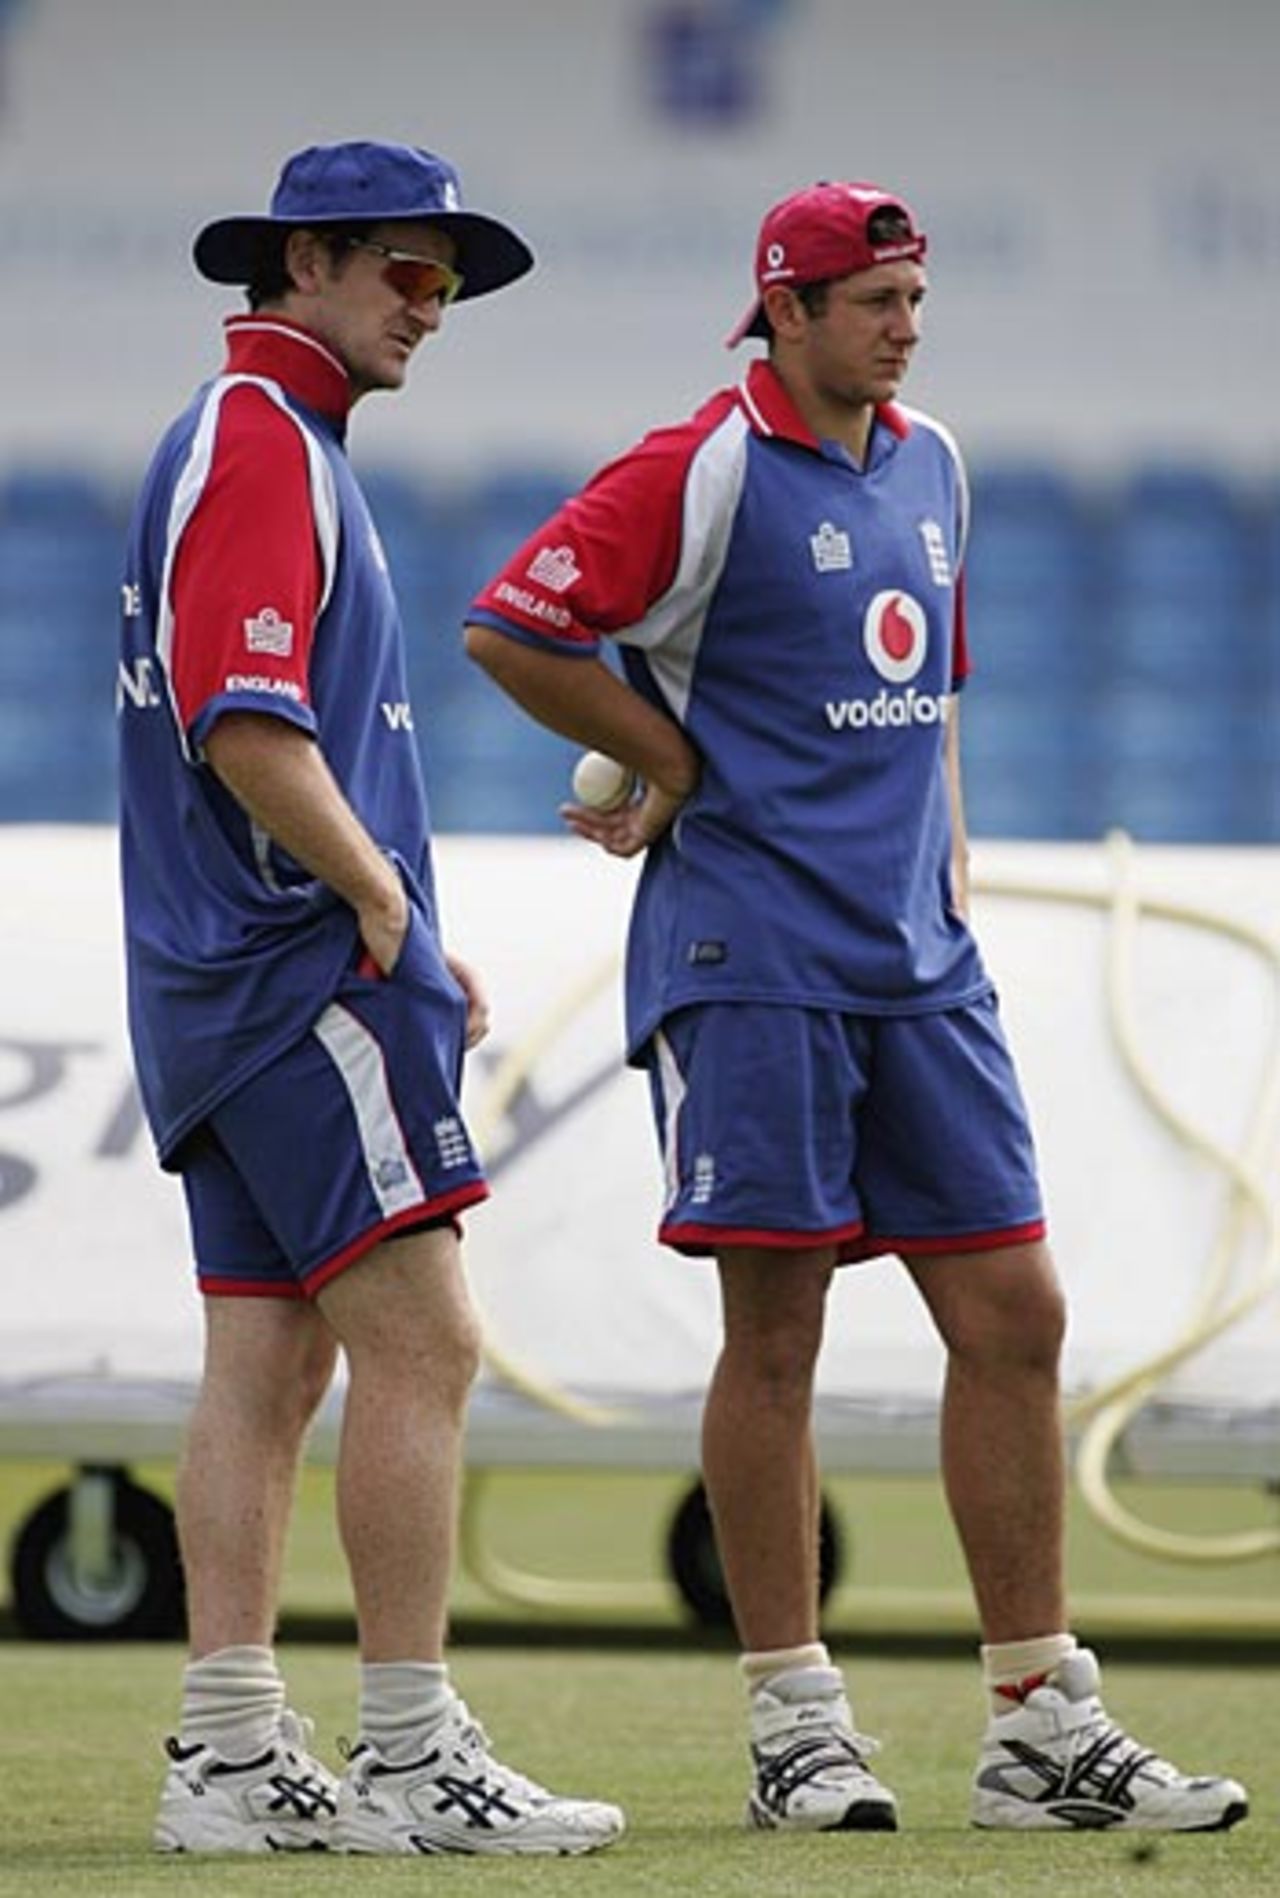 Kevin Shine and Tim Bresnan watch the net session ahead of tomorrow's final one-dayer at Headingley, June 30, 2006